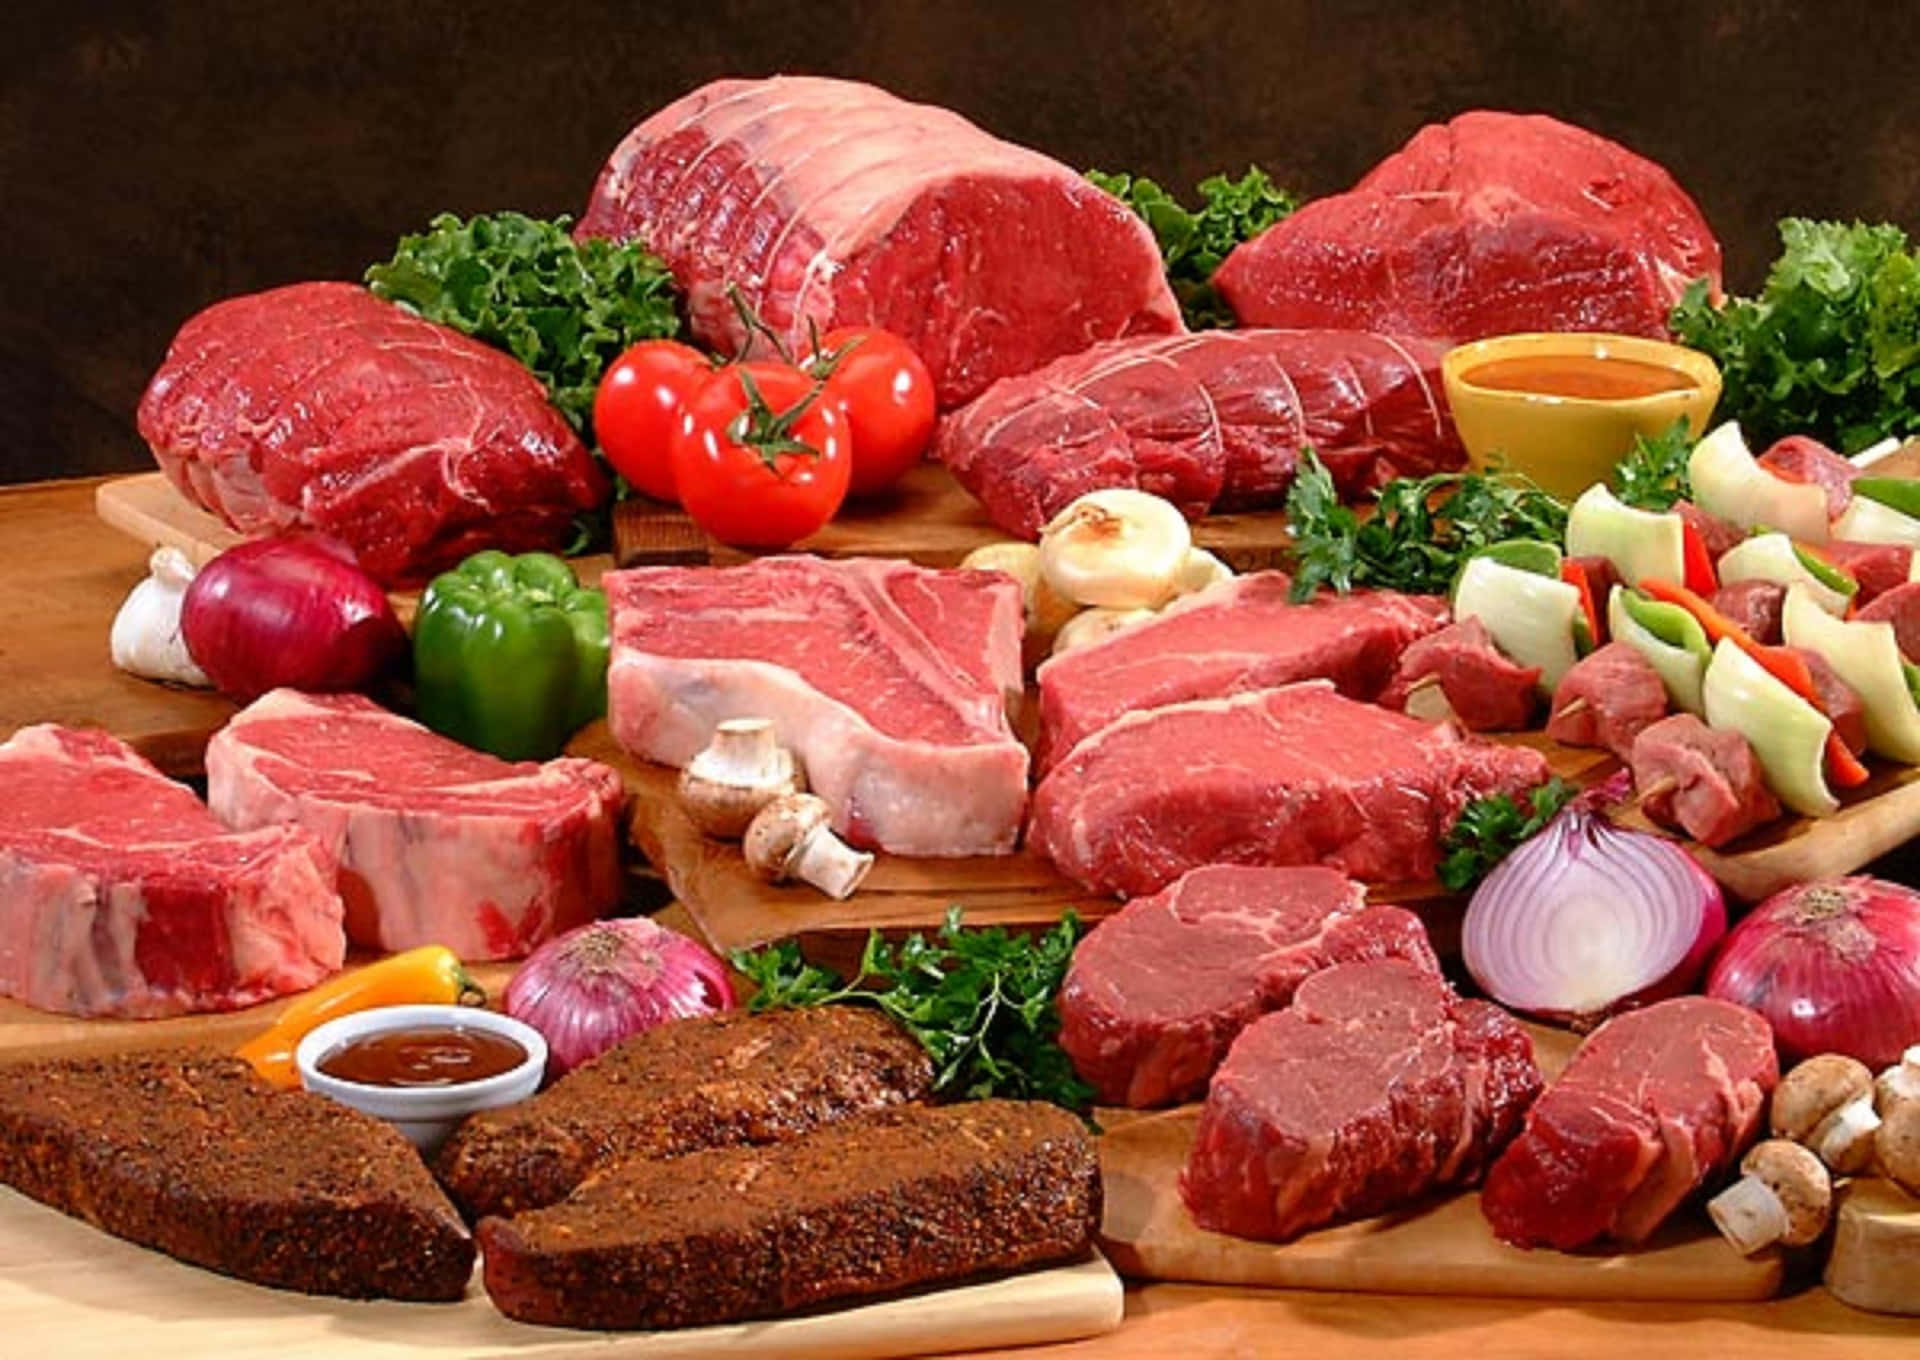 A Variety Of Meats And Vegetables On A Wooden Board